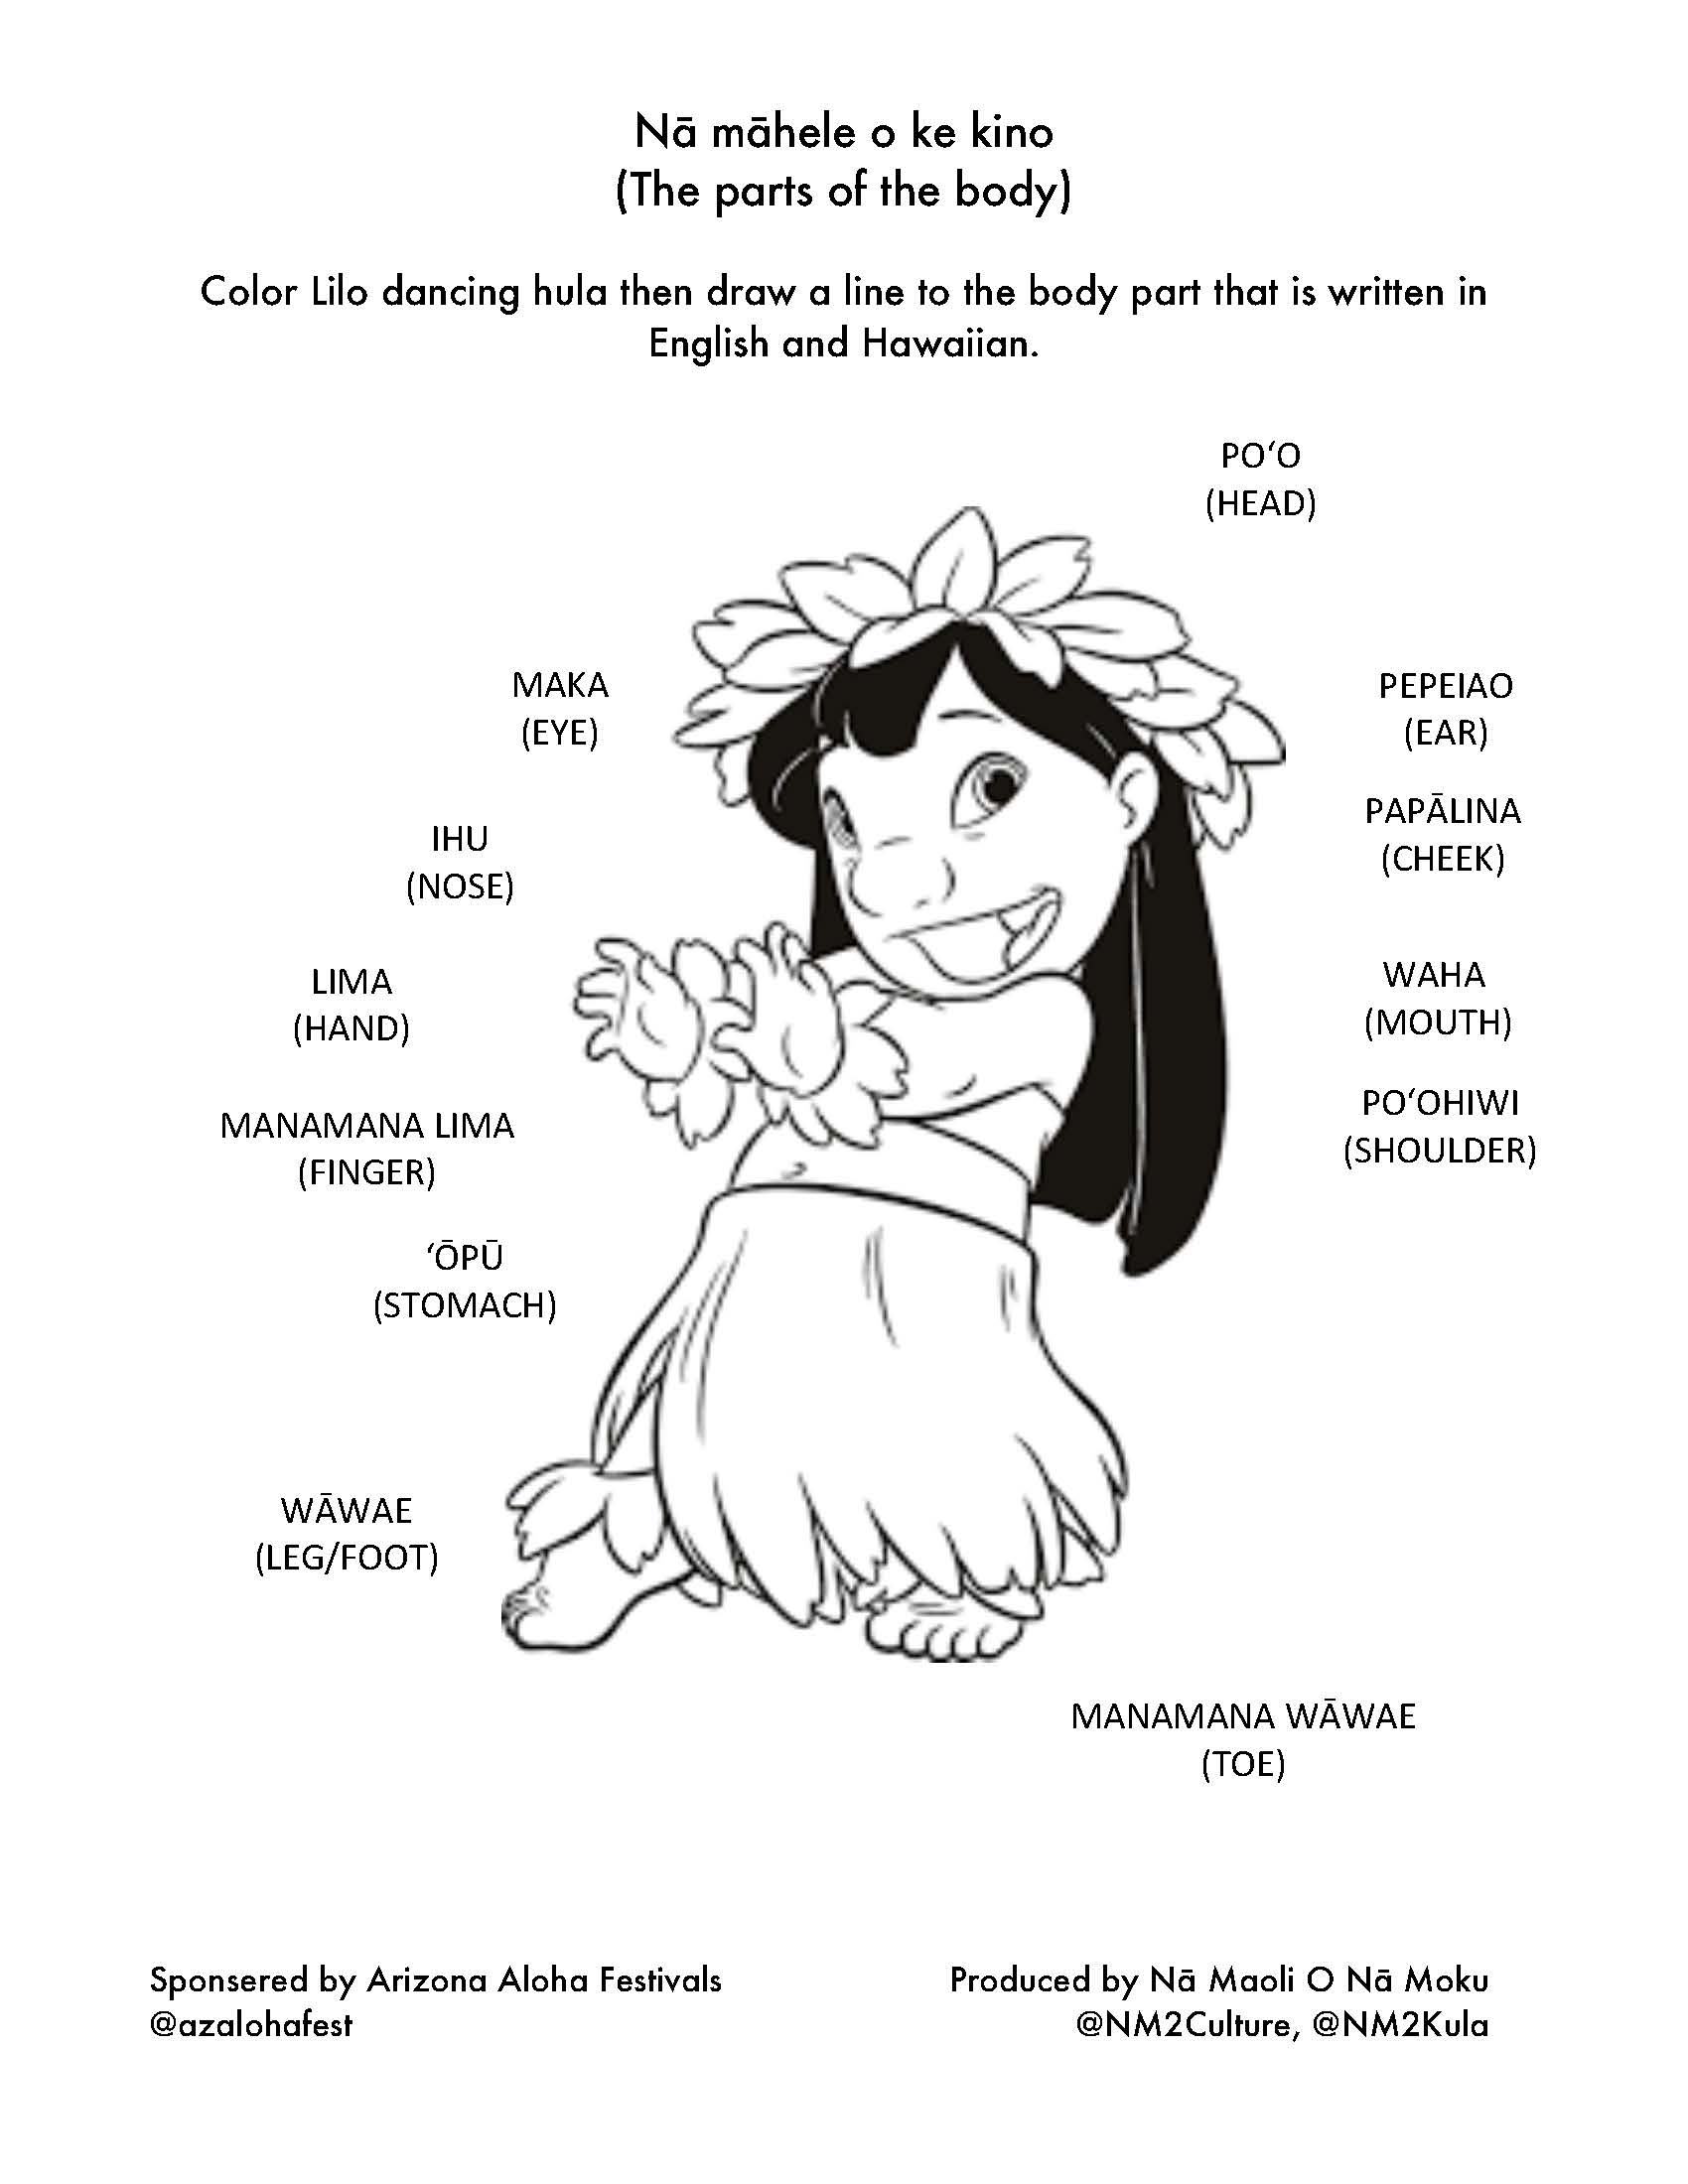 Coloring page of body parts in Hawaiian